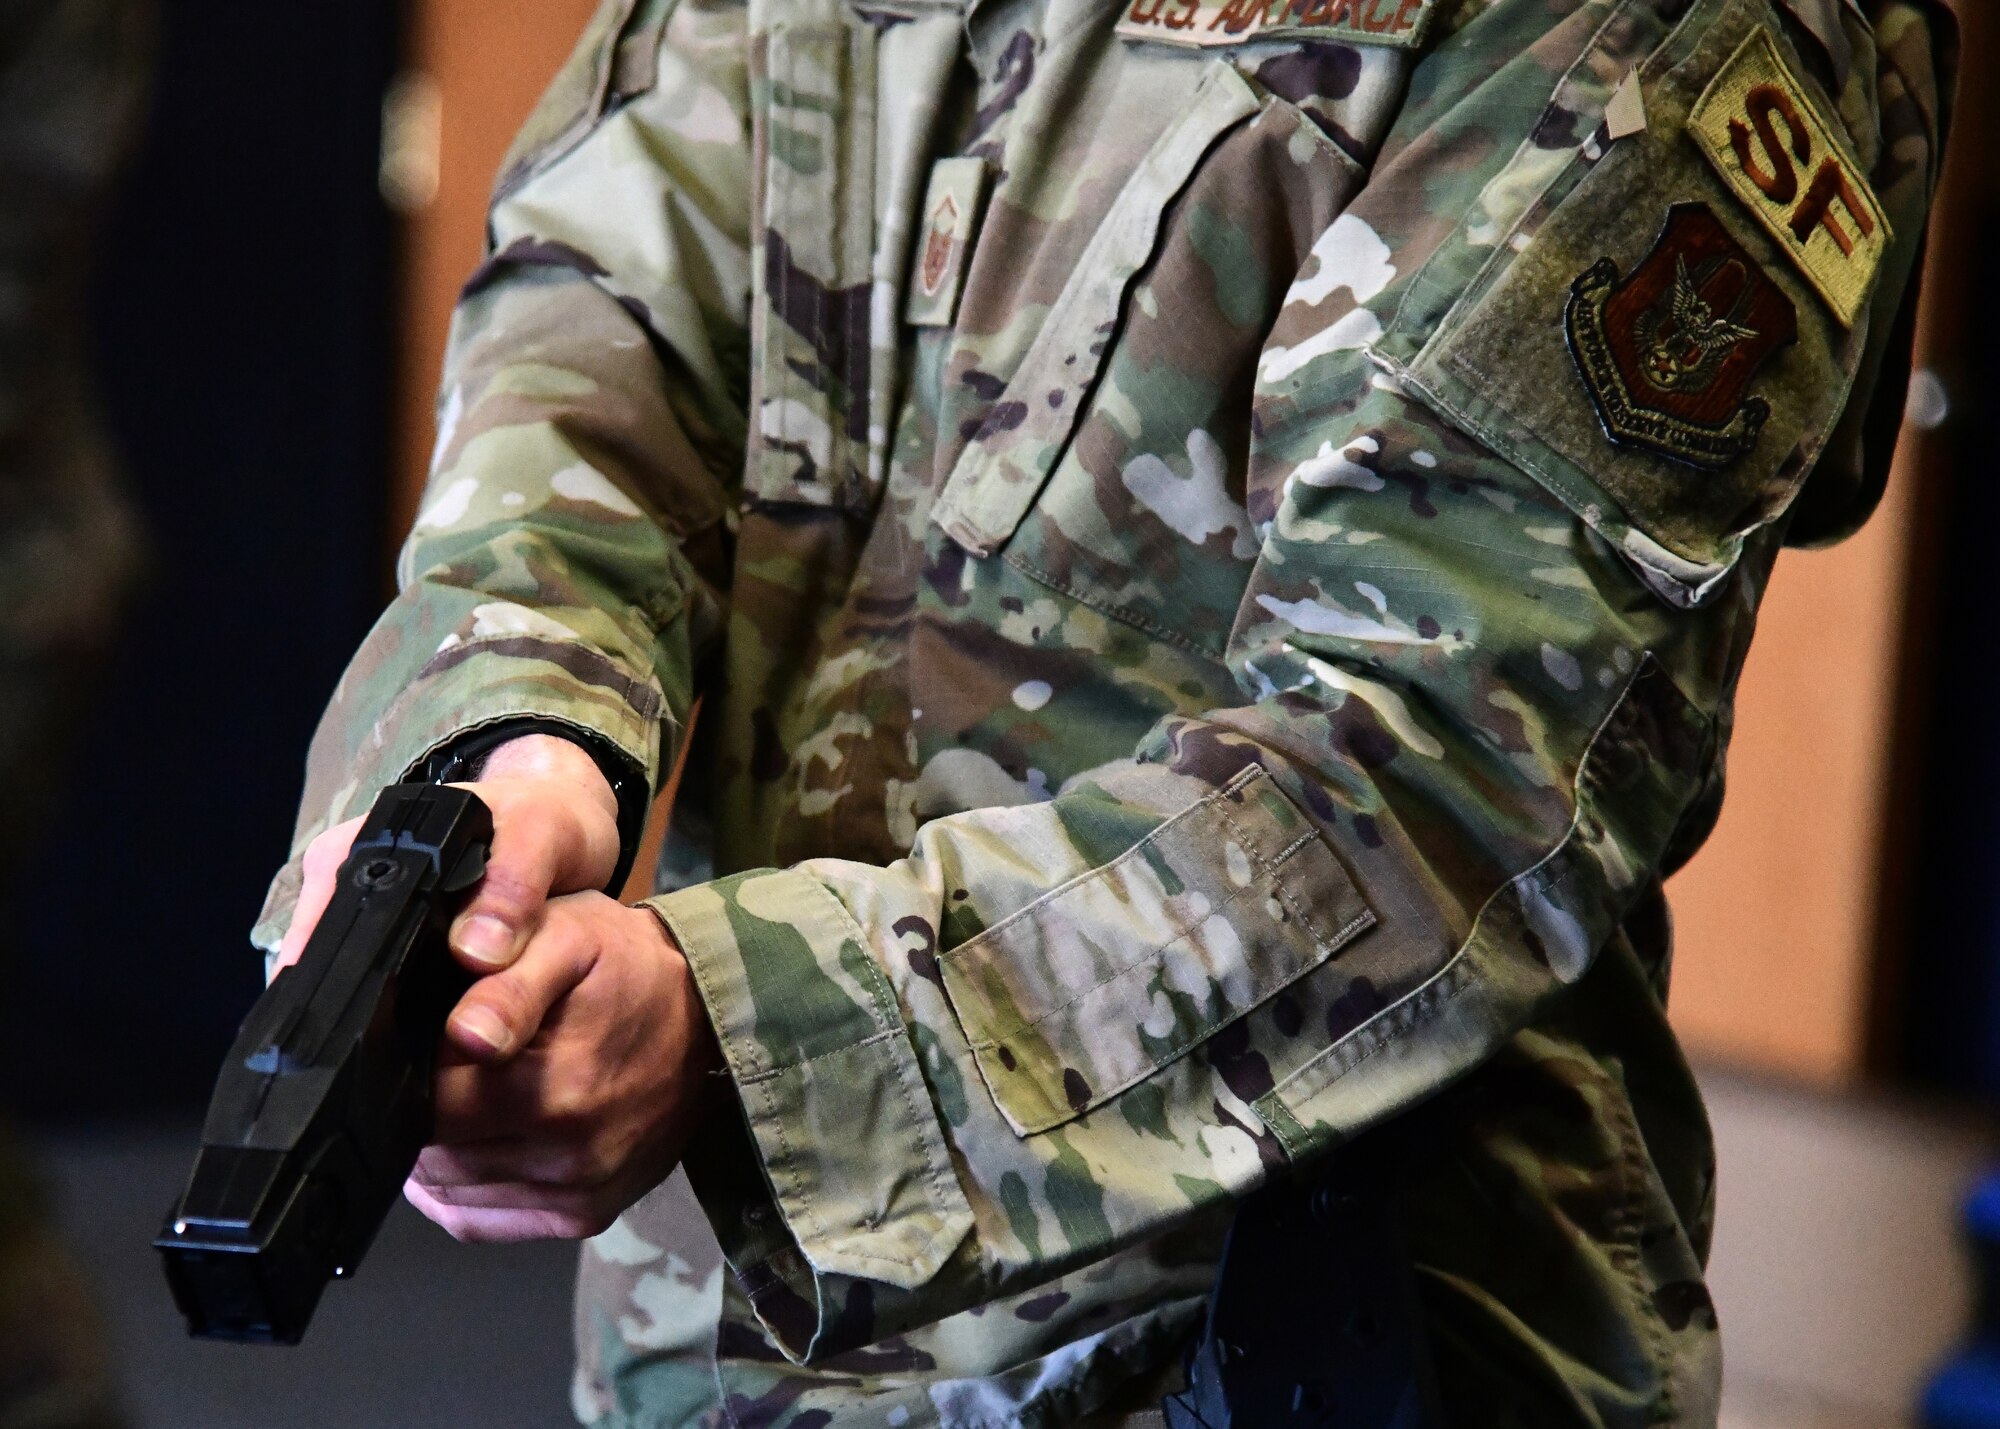 926th Security Forces Squadron practices taser drills during their Leader Led Training Course, April 10, 2021, at Nellis Air Force Base, Nevada.